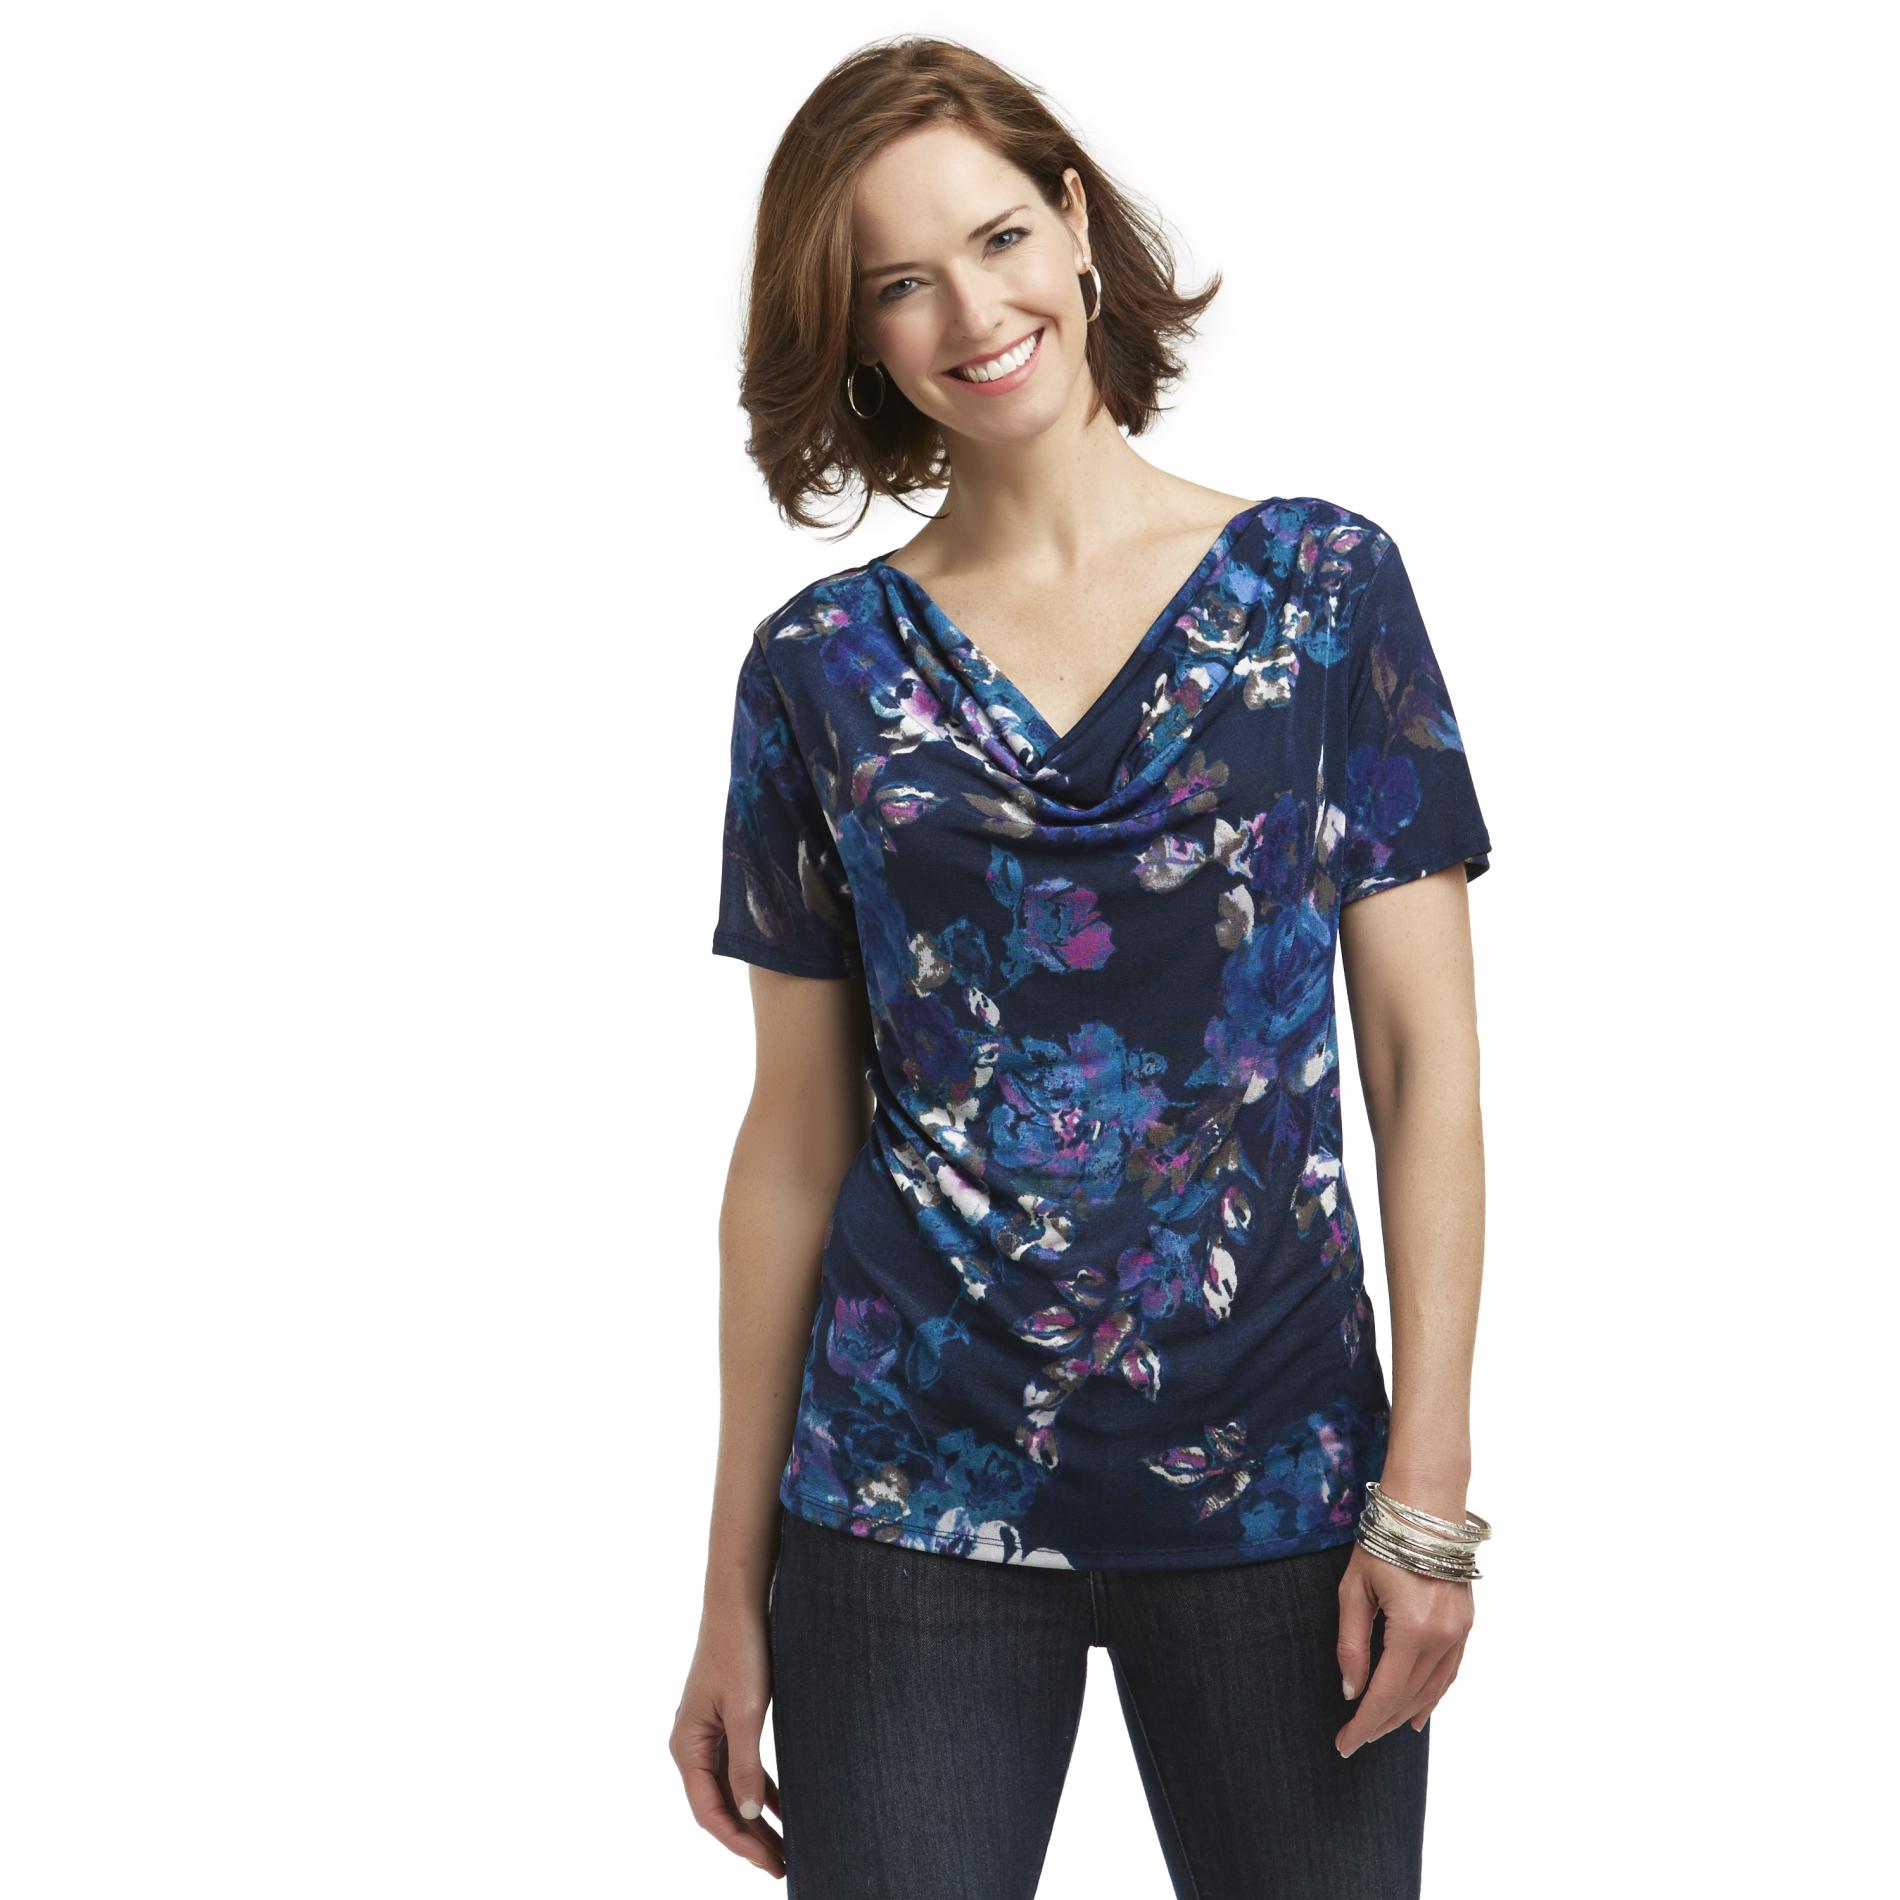 Jaclyn Smith Women's Cowl Neck Top - Floral